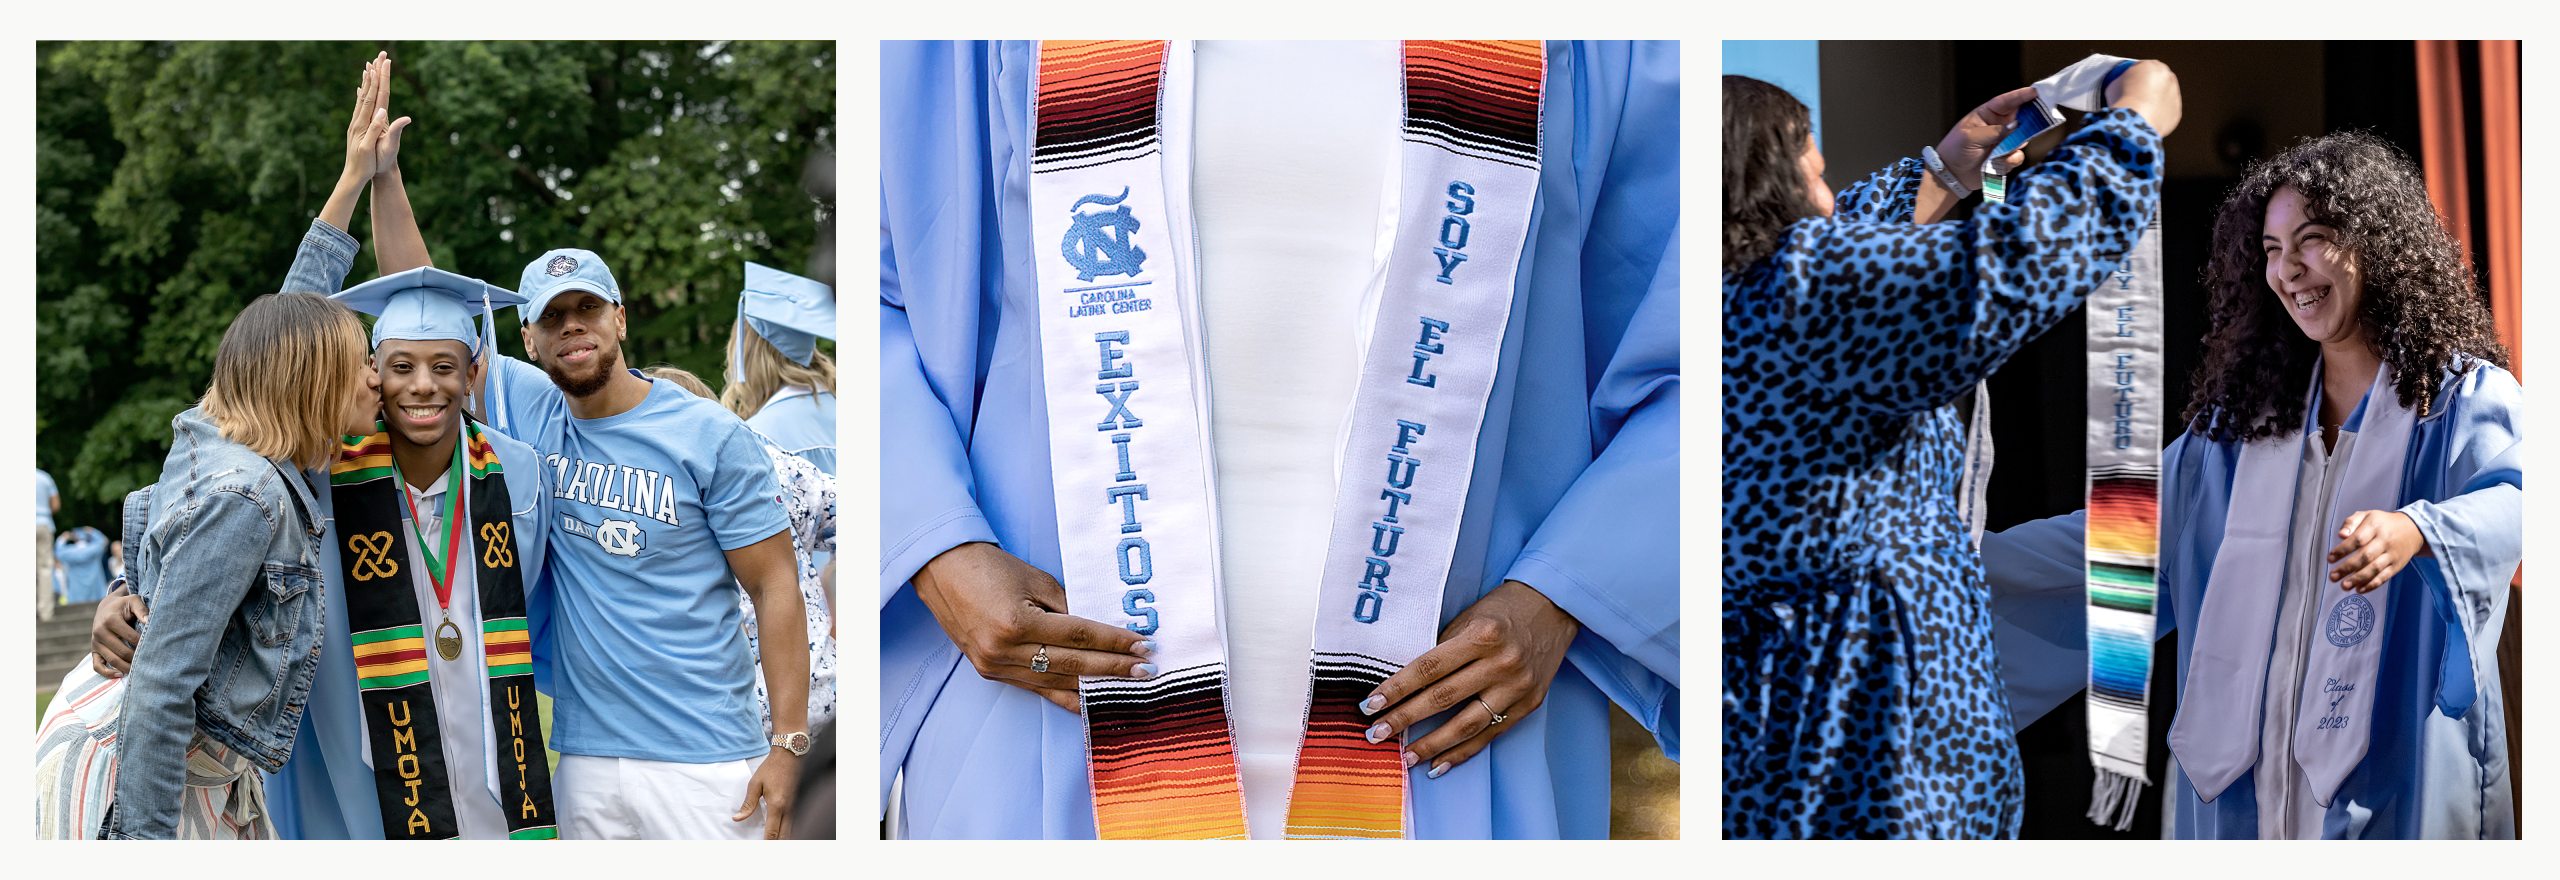 Three-photo collage with graduates at past Commencement ceremonies and University events in Carolina Blue regalia with custom stoles.